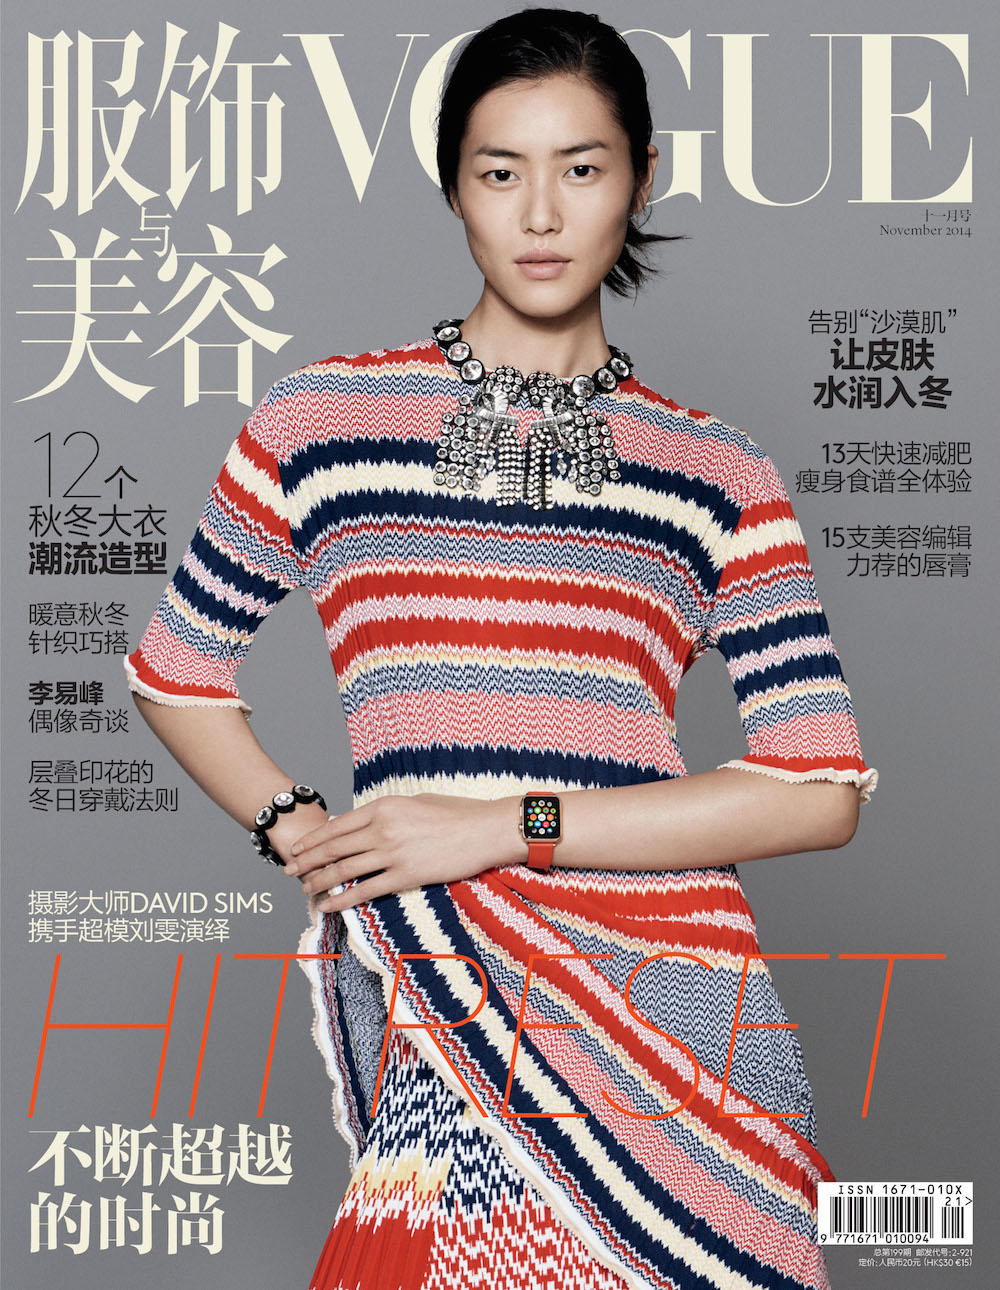 Apple Watch Featured on Cover of Vogue China [Photos]